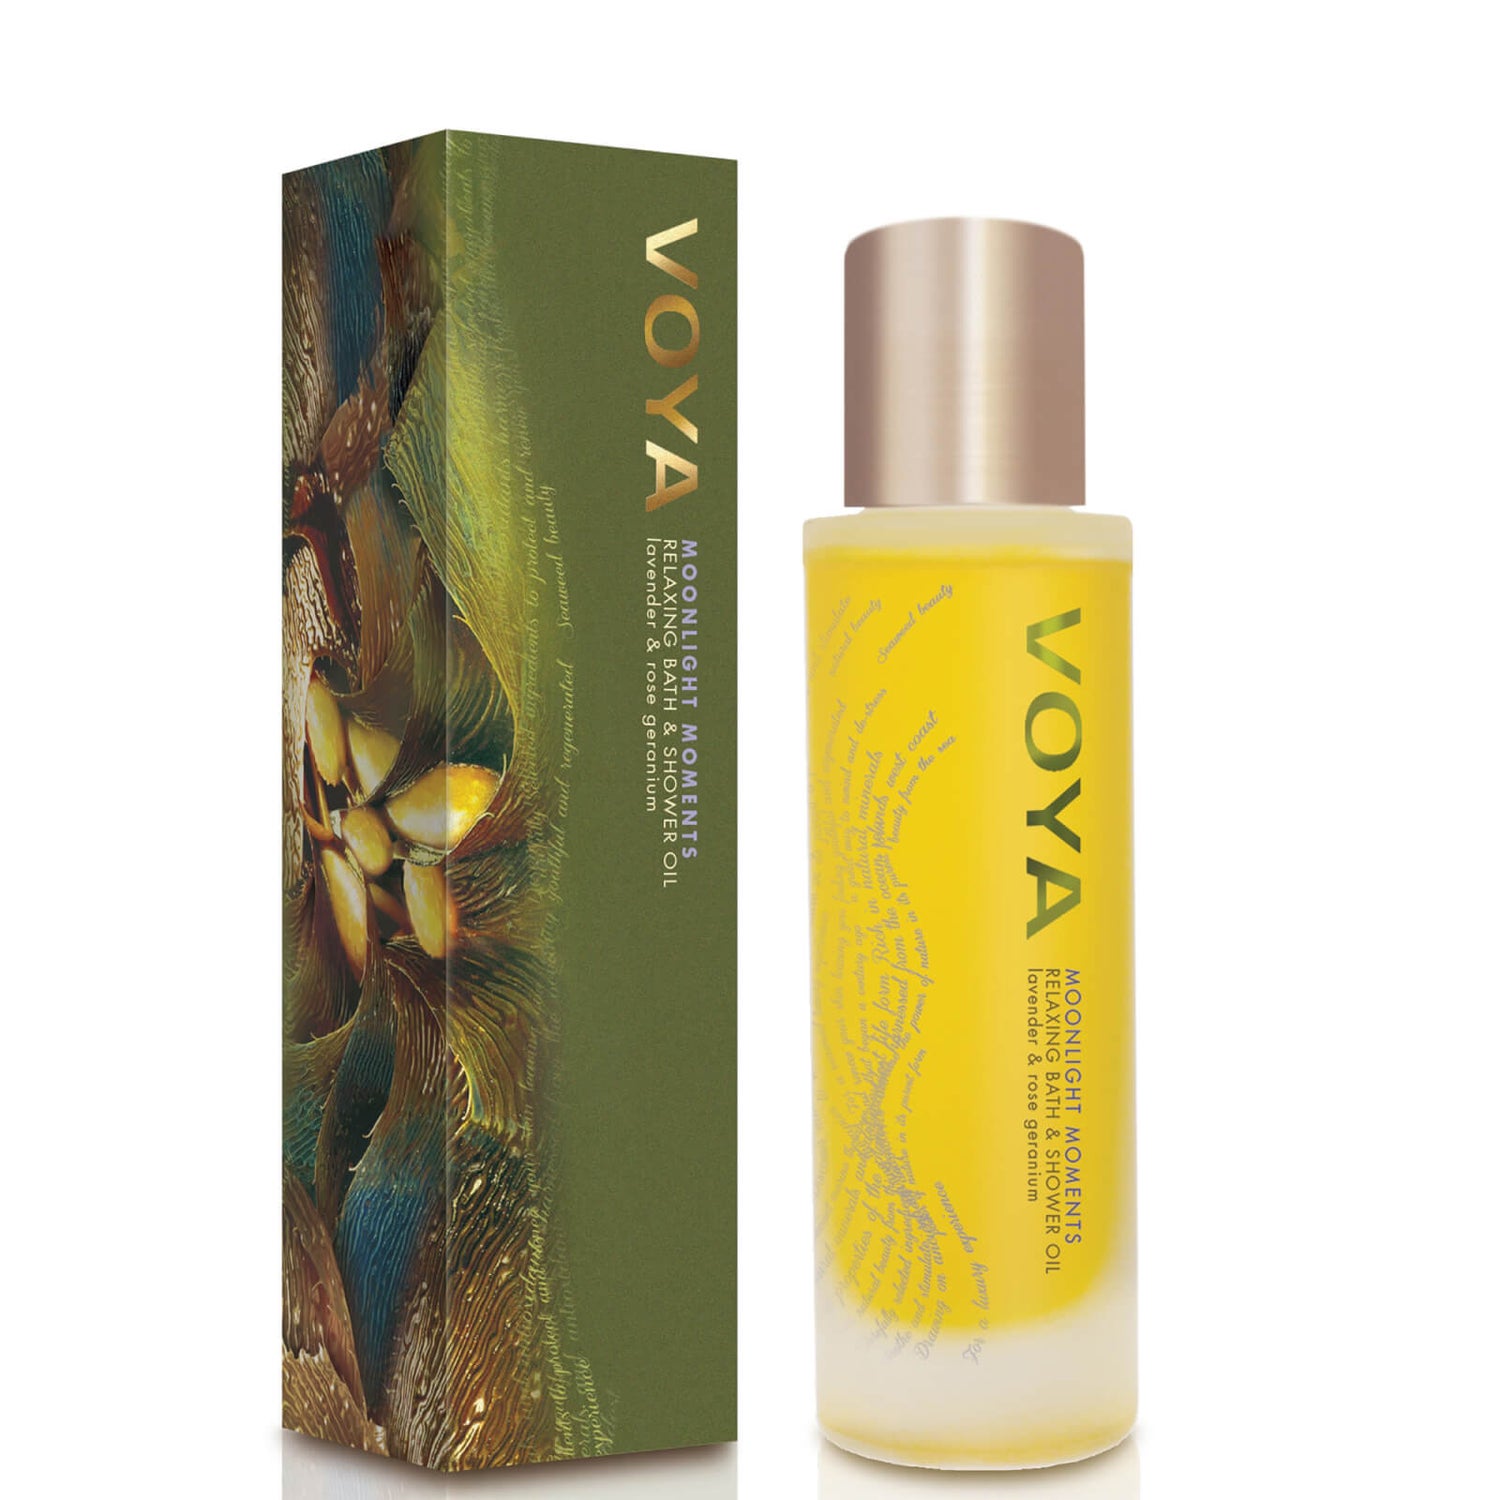 VOYA Moonlight Moments Relaxing Bath and Shower Oil 50ml